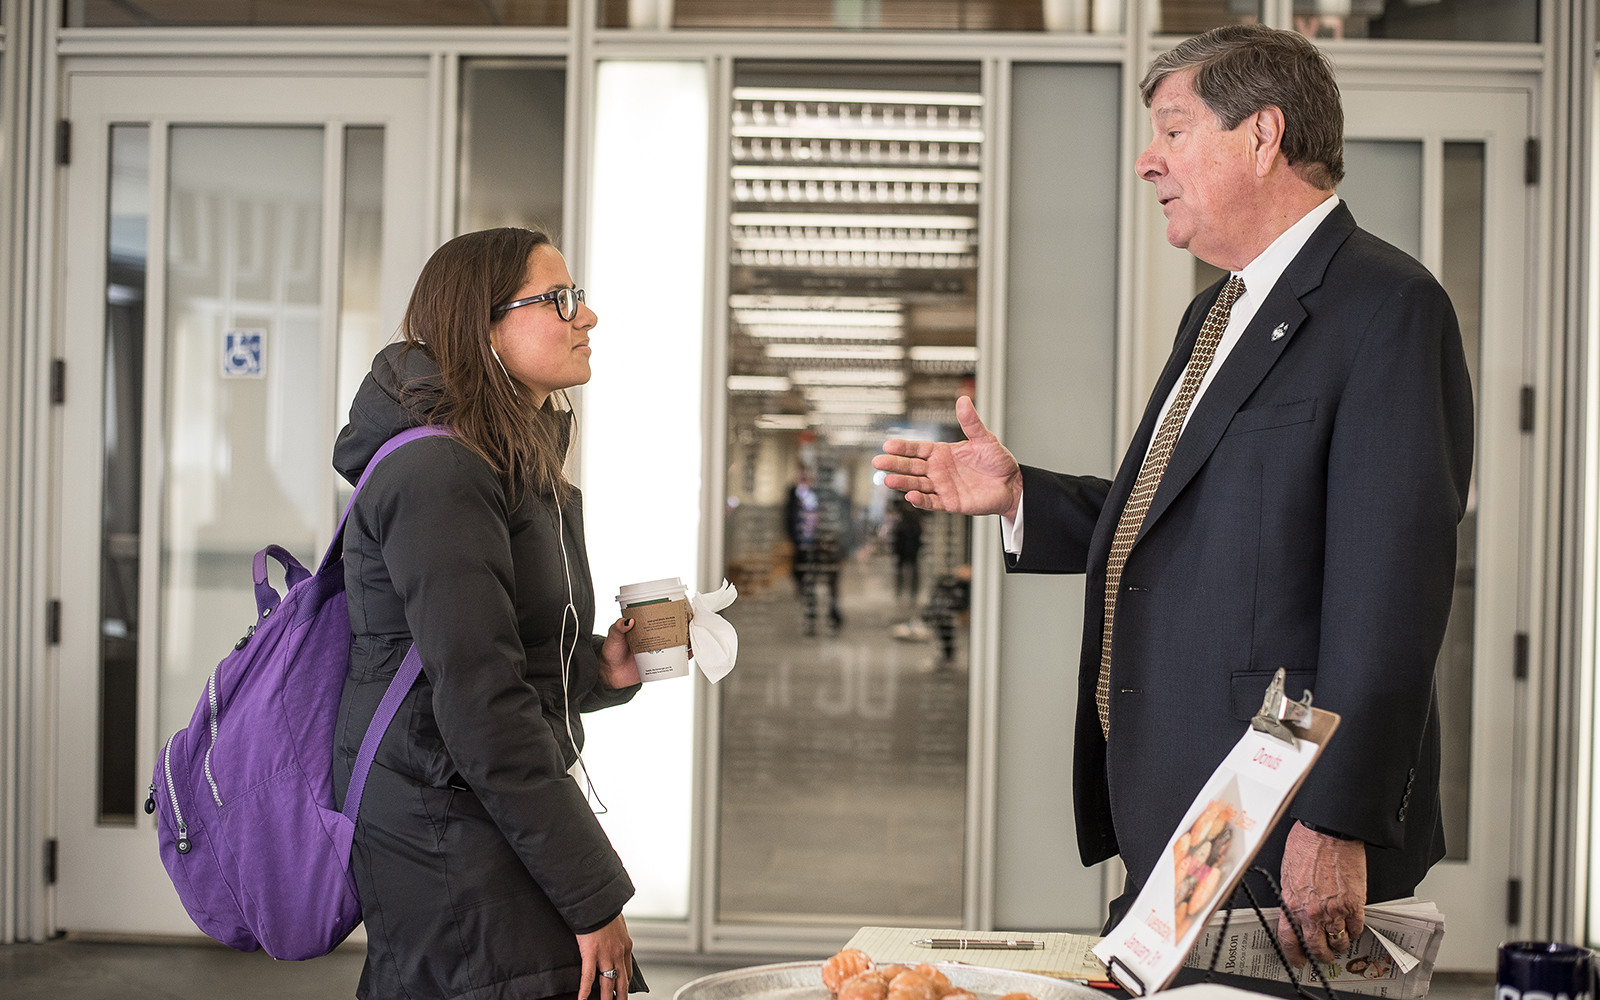 Students stopped for a meet and greet with UConn Business School Dean John Elliott on Tuesday morning. (Nathan Oldham/UConn School of Business)